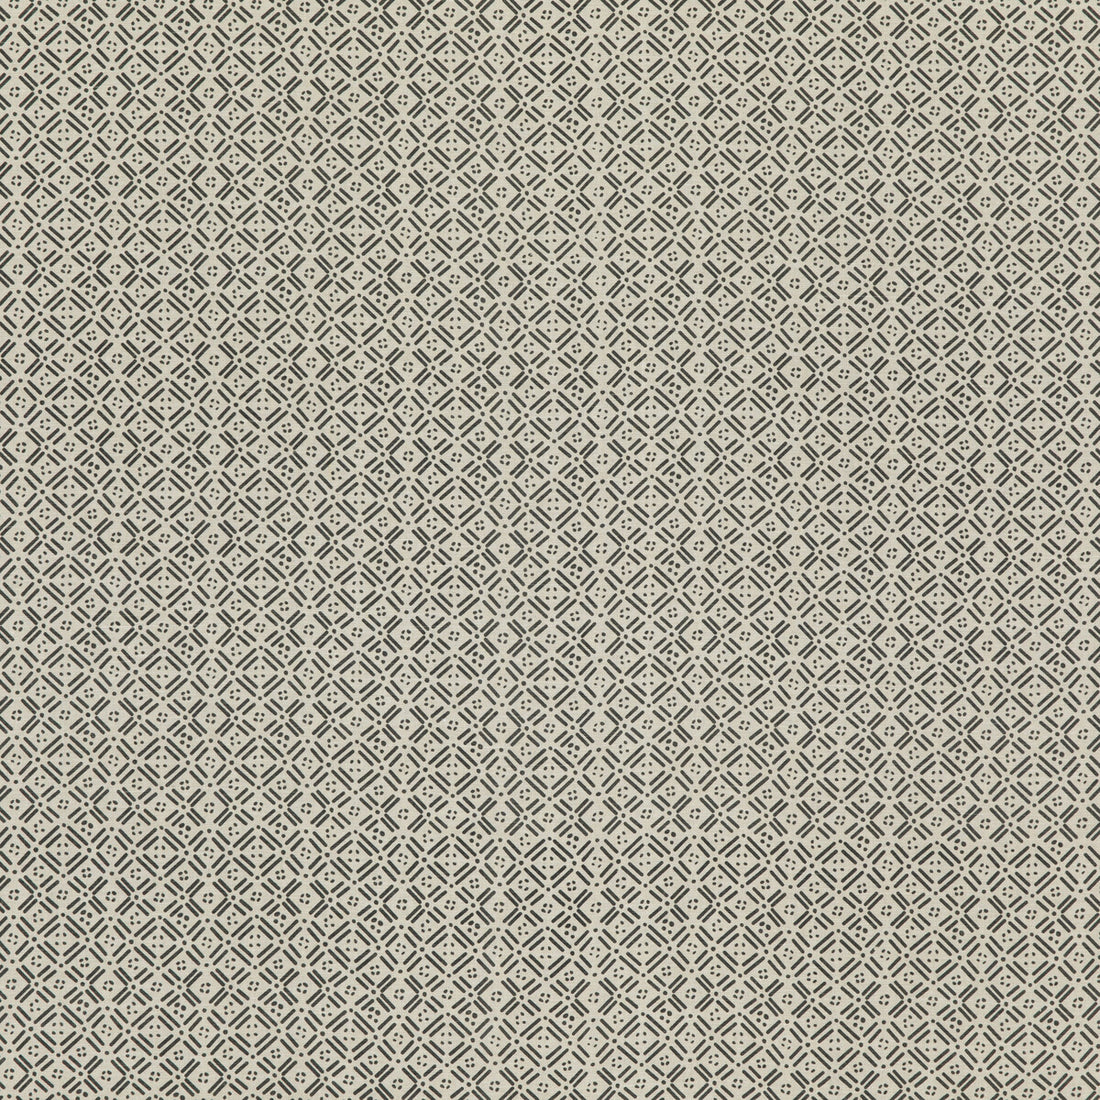 Aslin fabric in charcoal color - pattern ED75036.3.0 - by Threads in the Moro collection